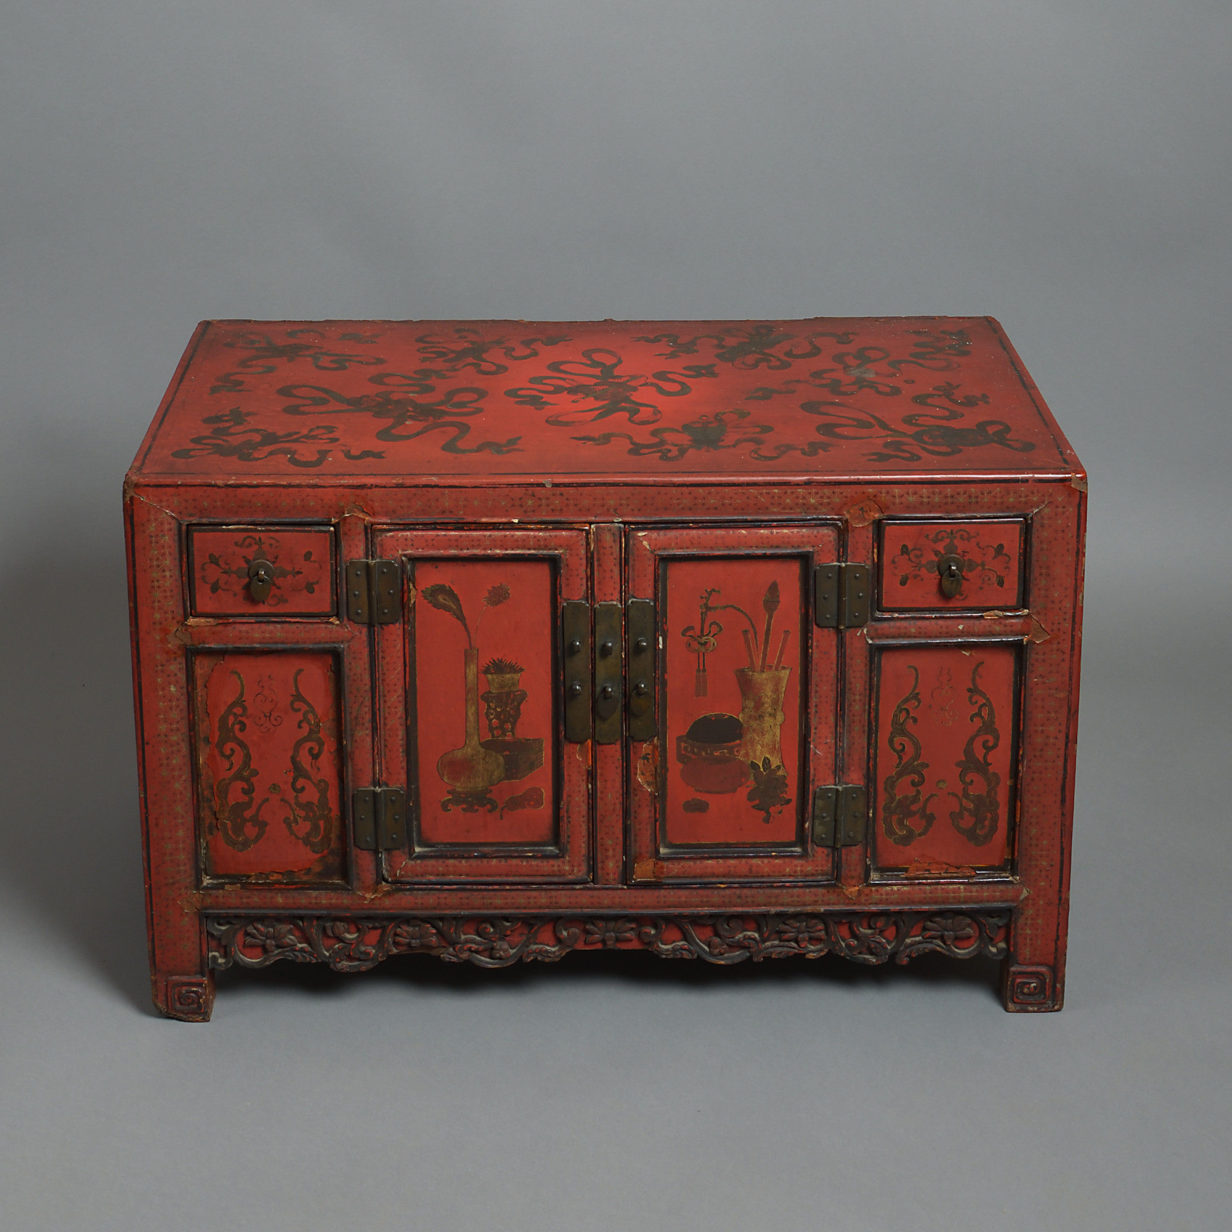 19th century pair of red lacquer low cabinets